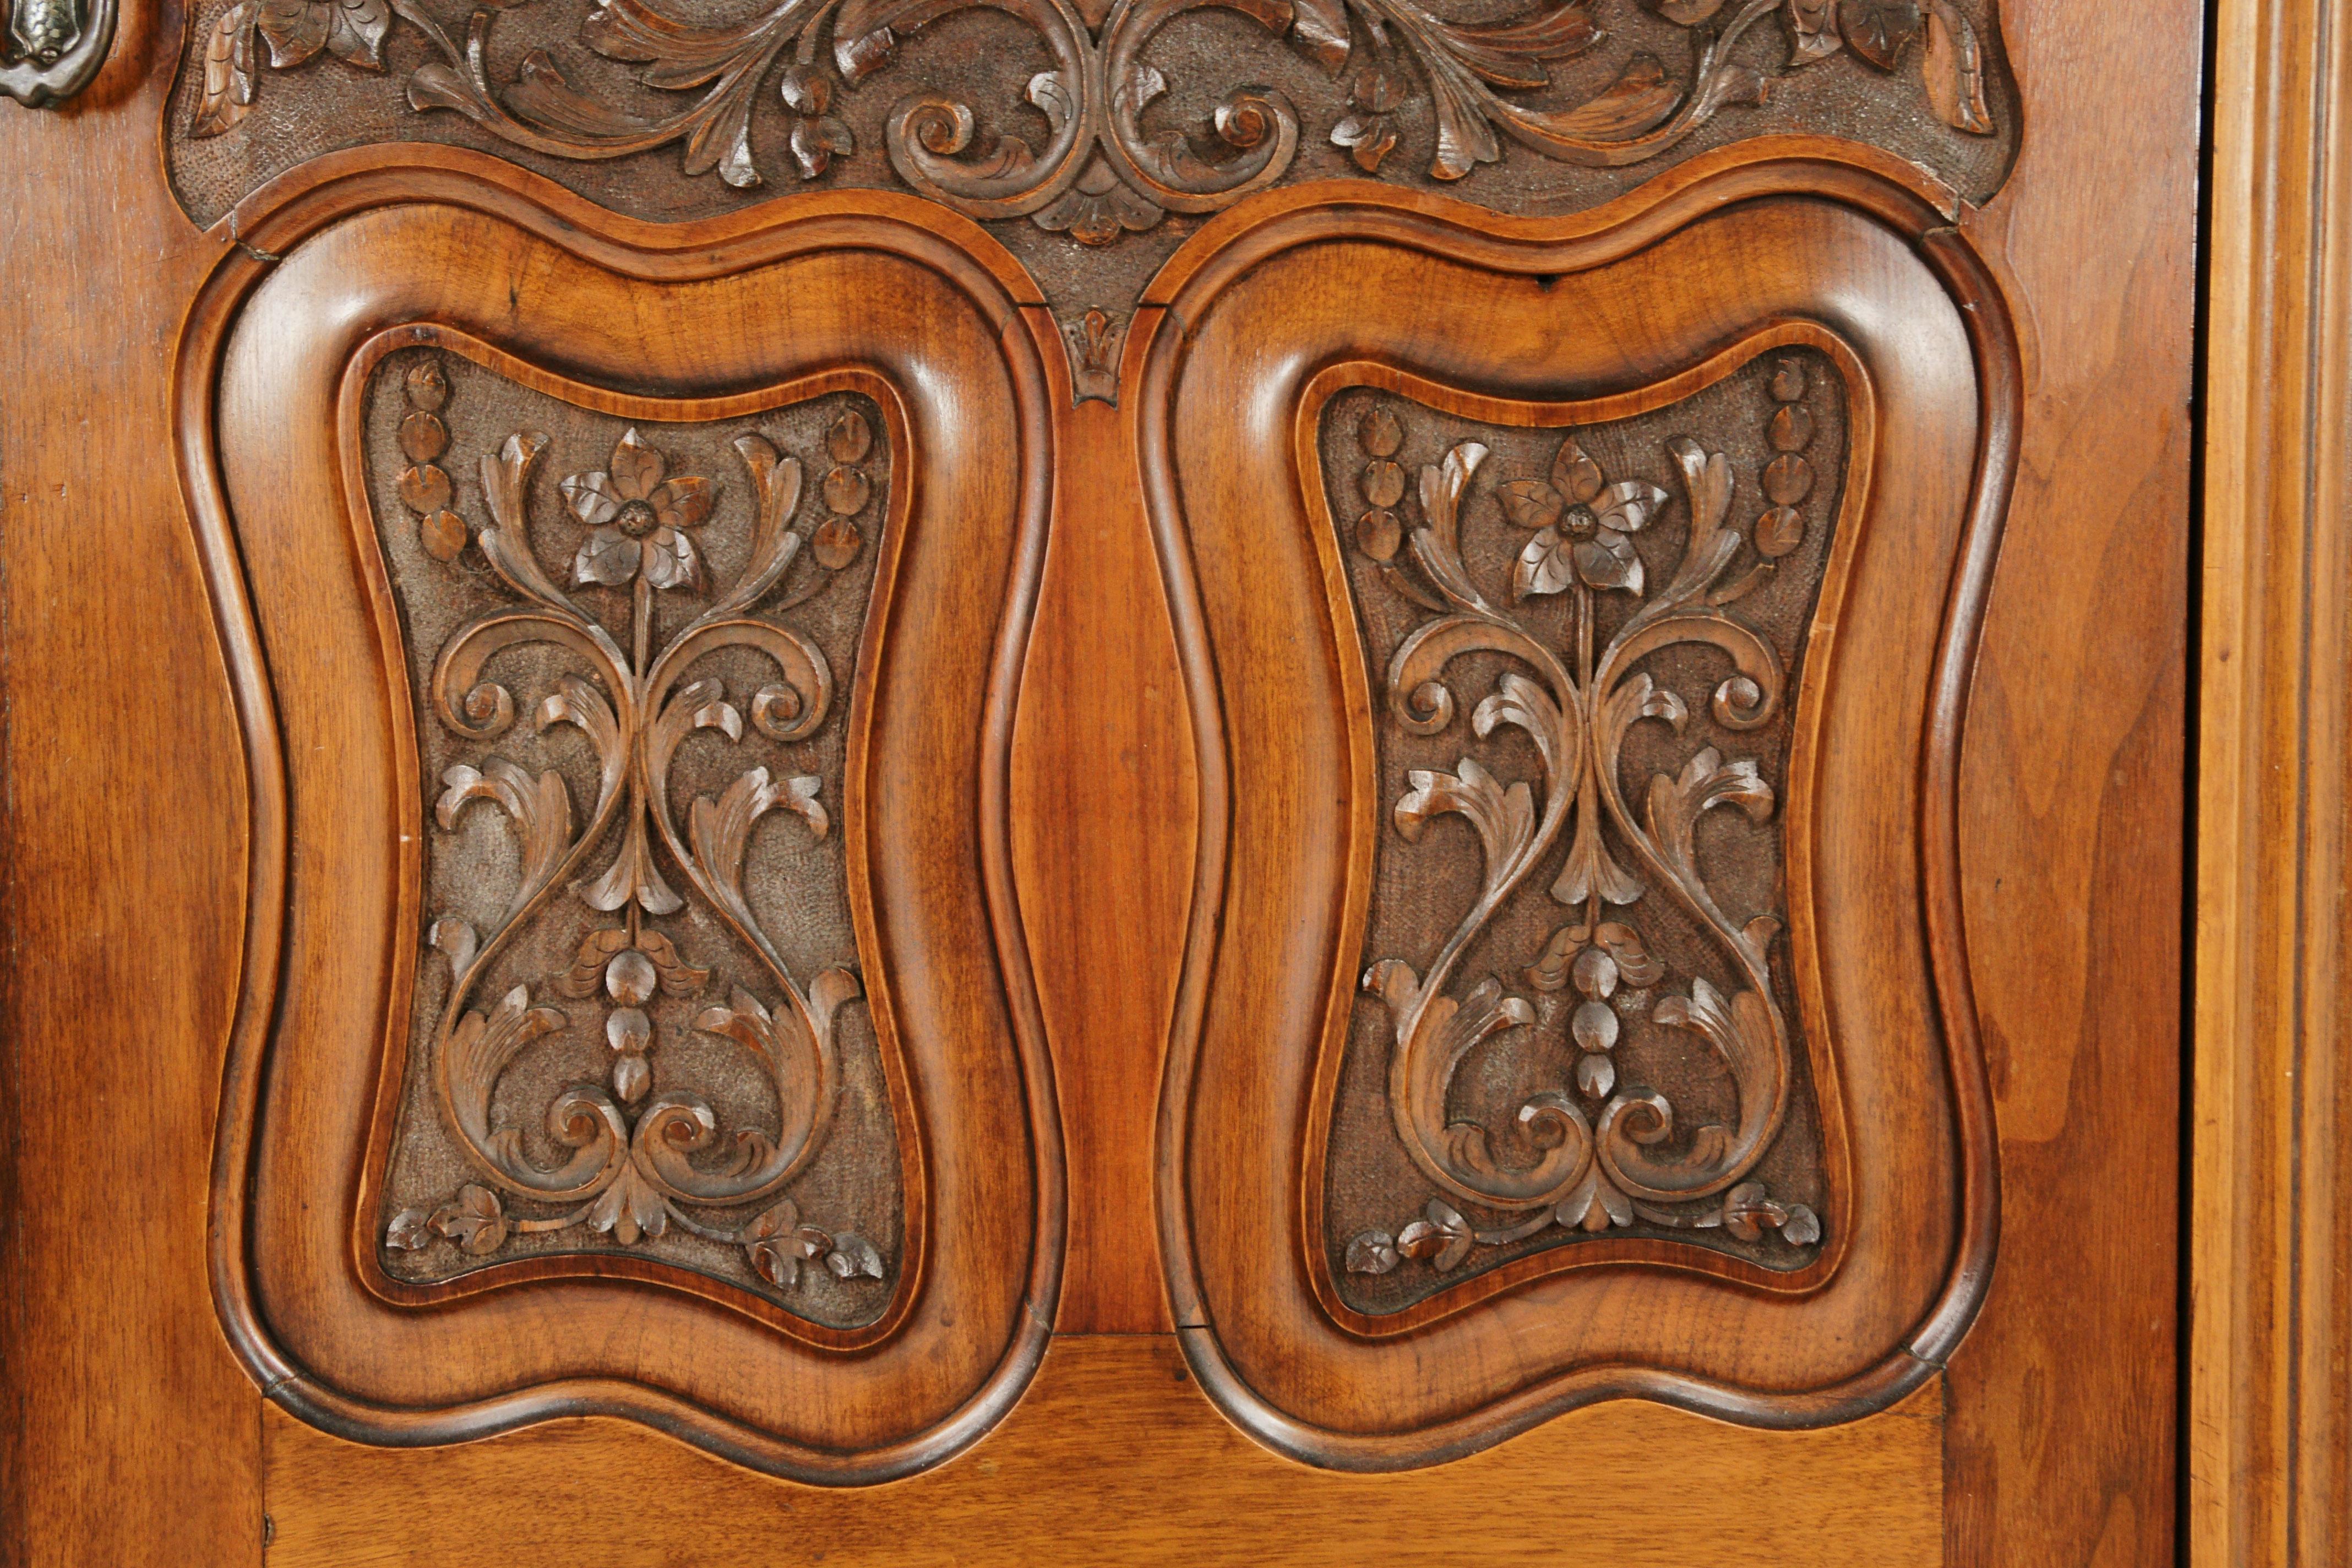 Antique walnut armoire, wardrobe, triple door closet, Scotland 1890, antique furniture, B1613

Scotland, 1890
Solid walnut and veneers
Original finish
Dentil cornice above
Heavily carved central door below
Flanked by a pair of carved beveled glass